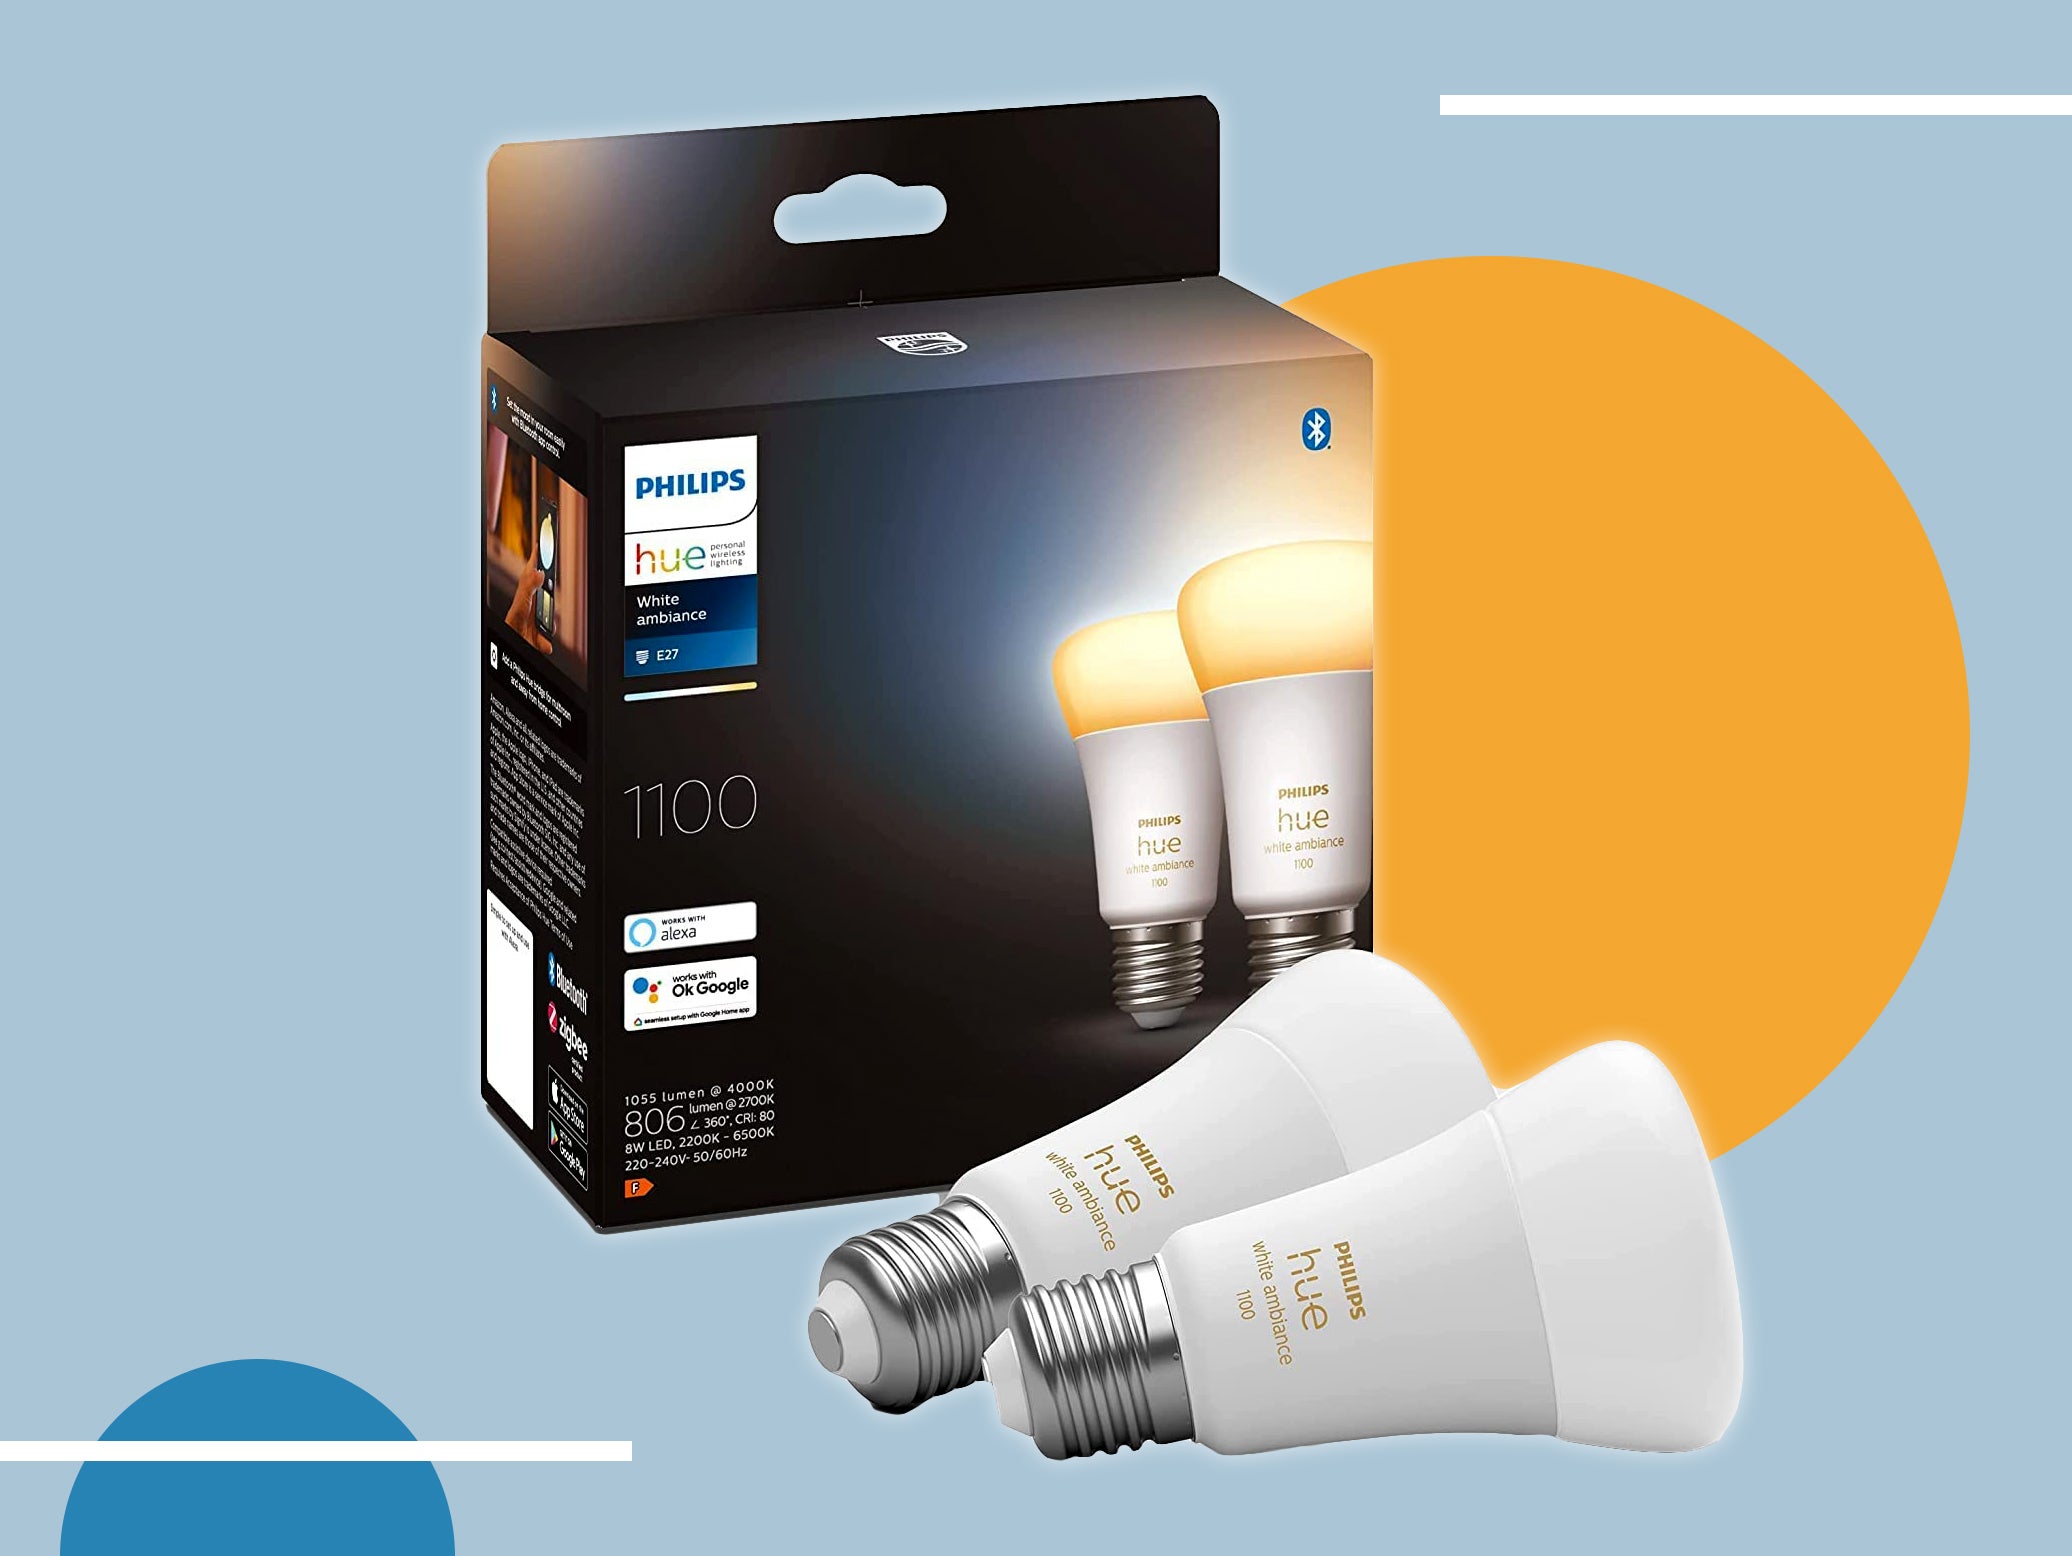 Save 50 per cent on this Philips hue light at Amazon | Independent